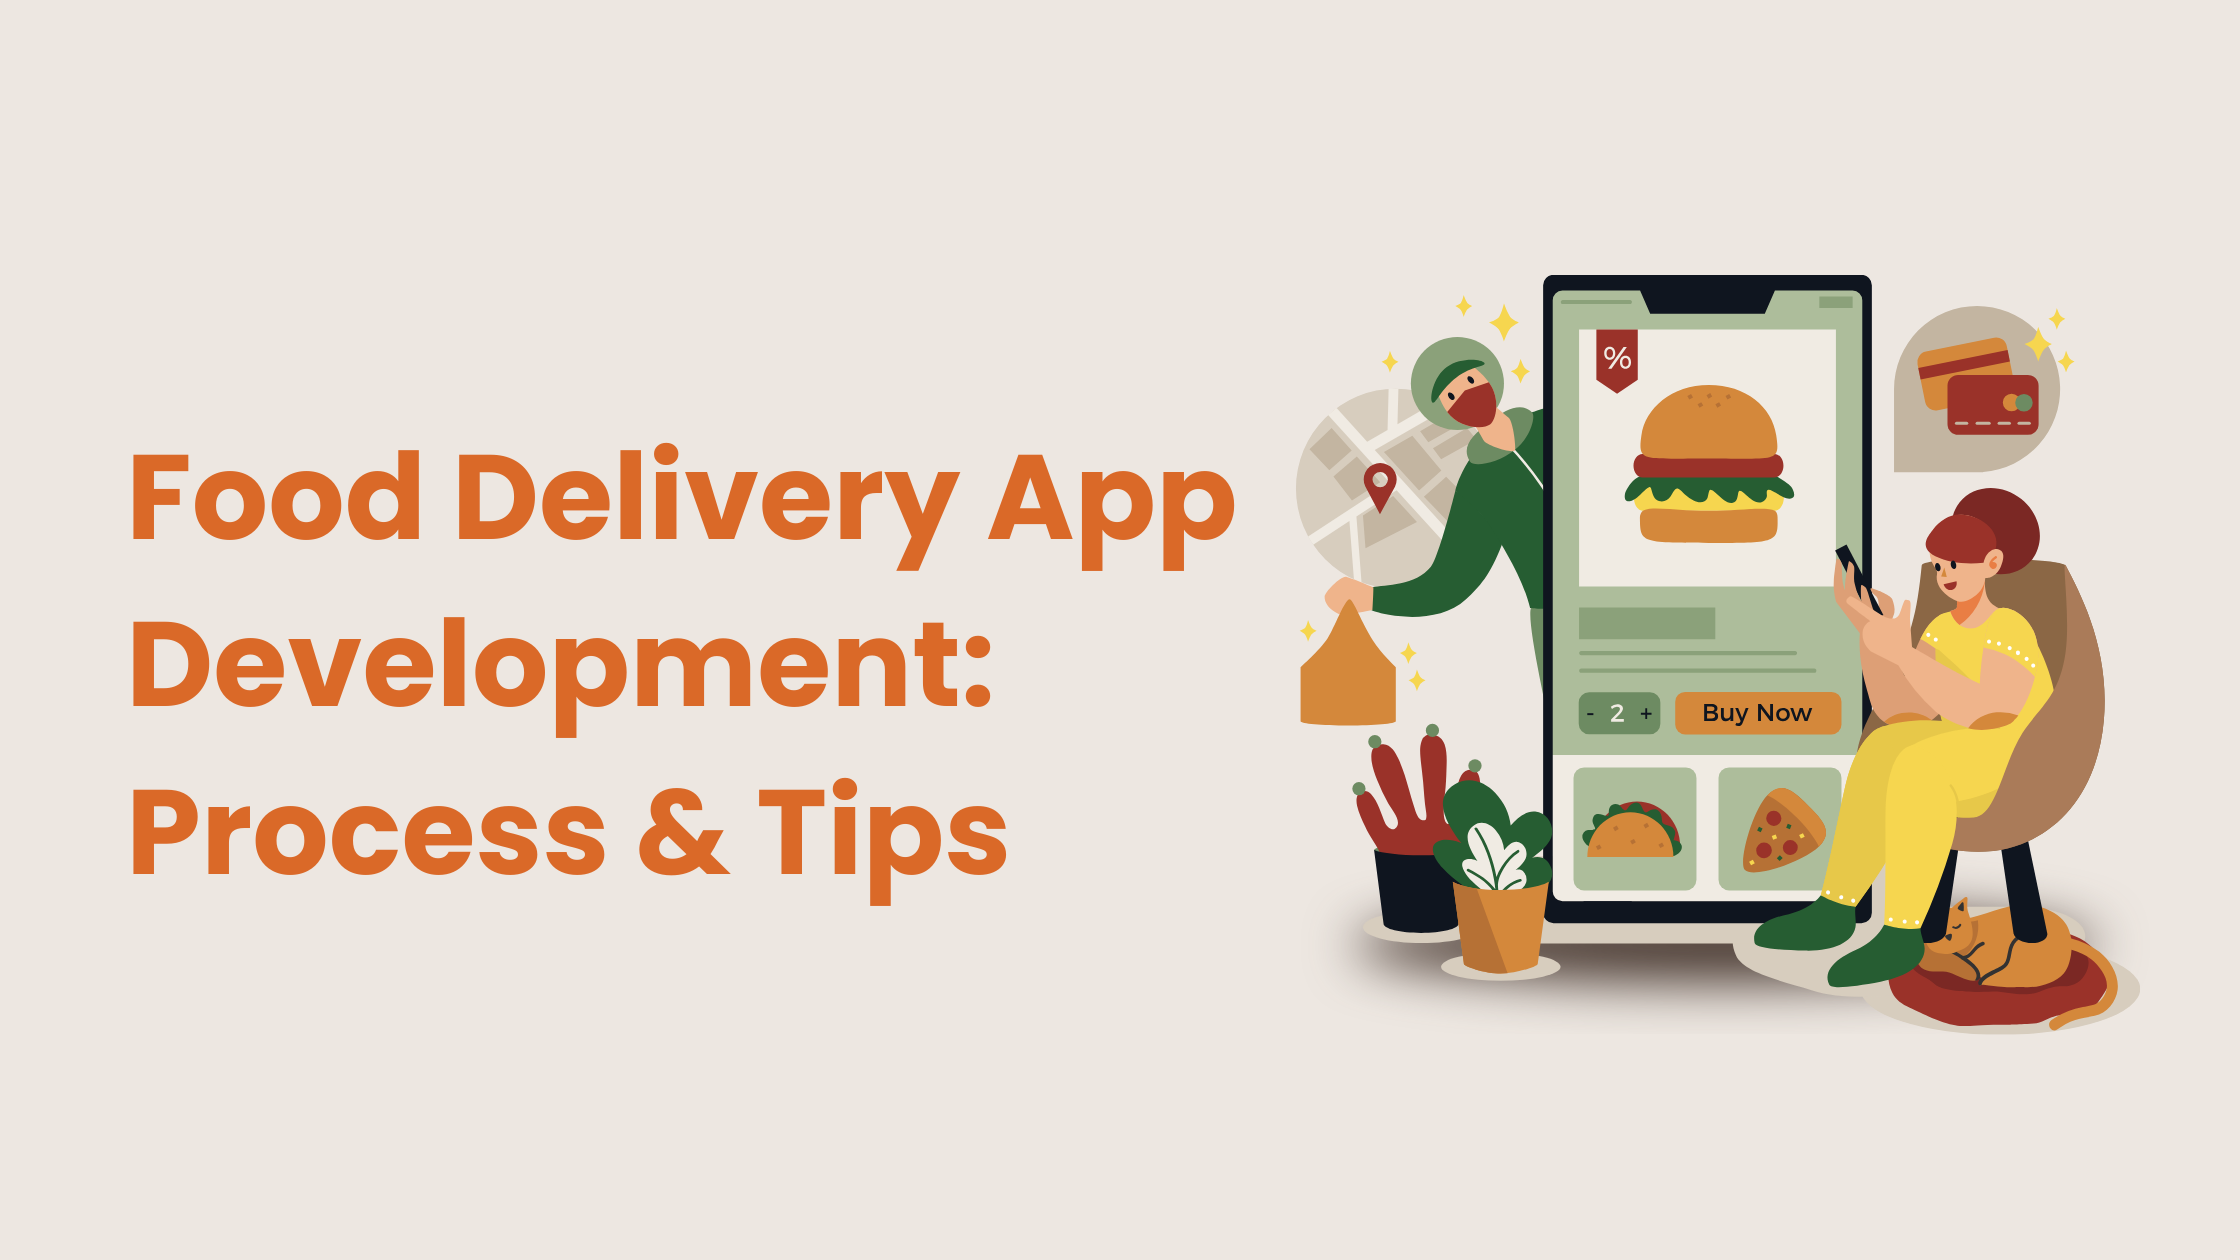 Food Delivery App Development: Process & Tips